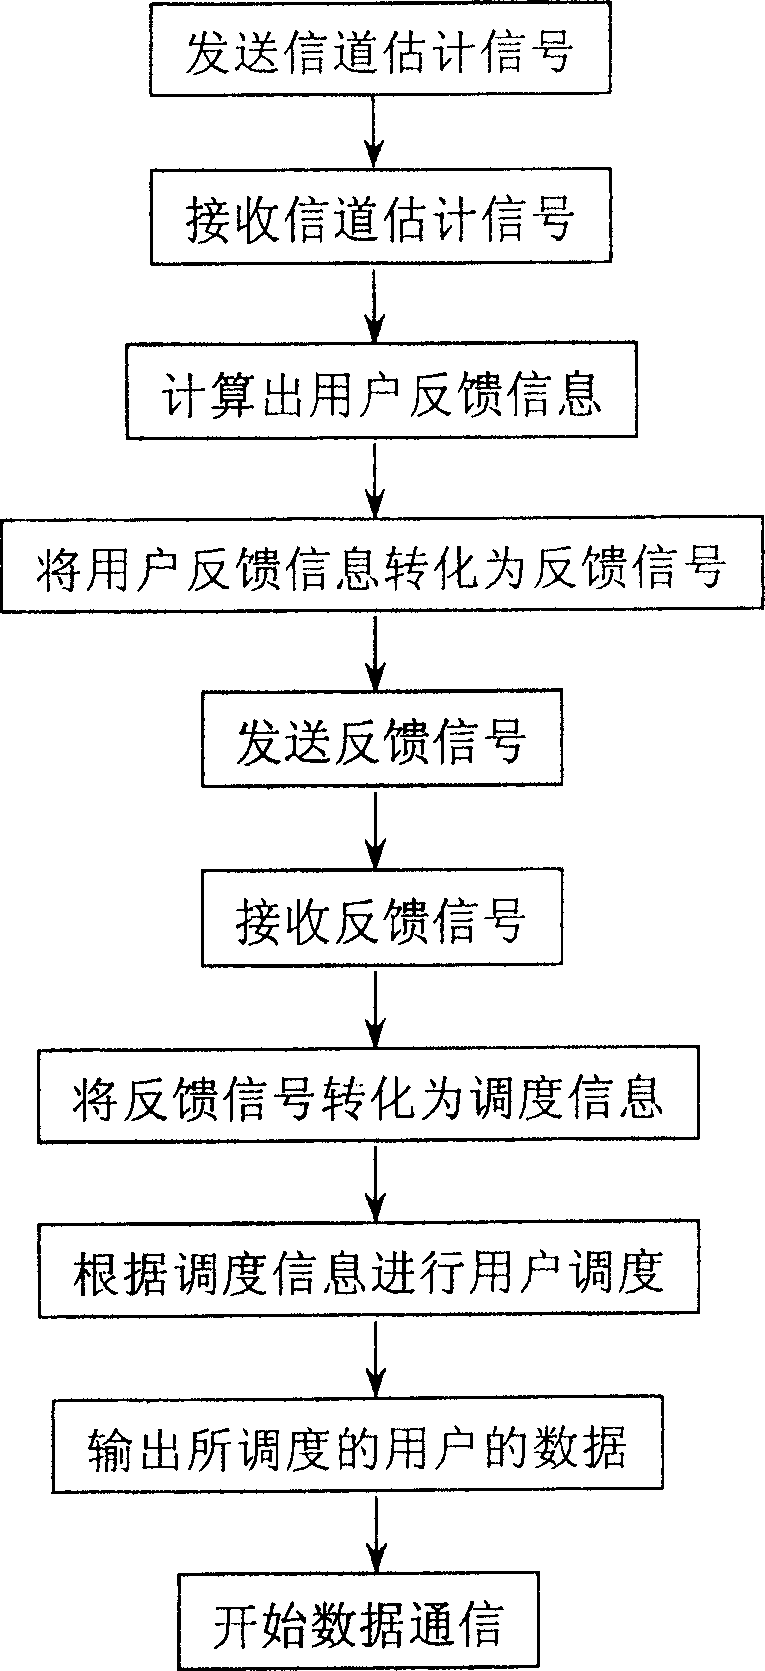 MIMO telecommunication system and user sheduling method